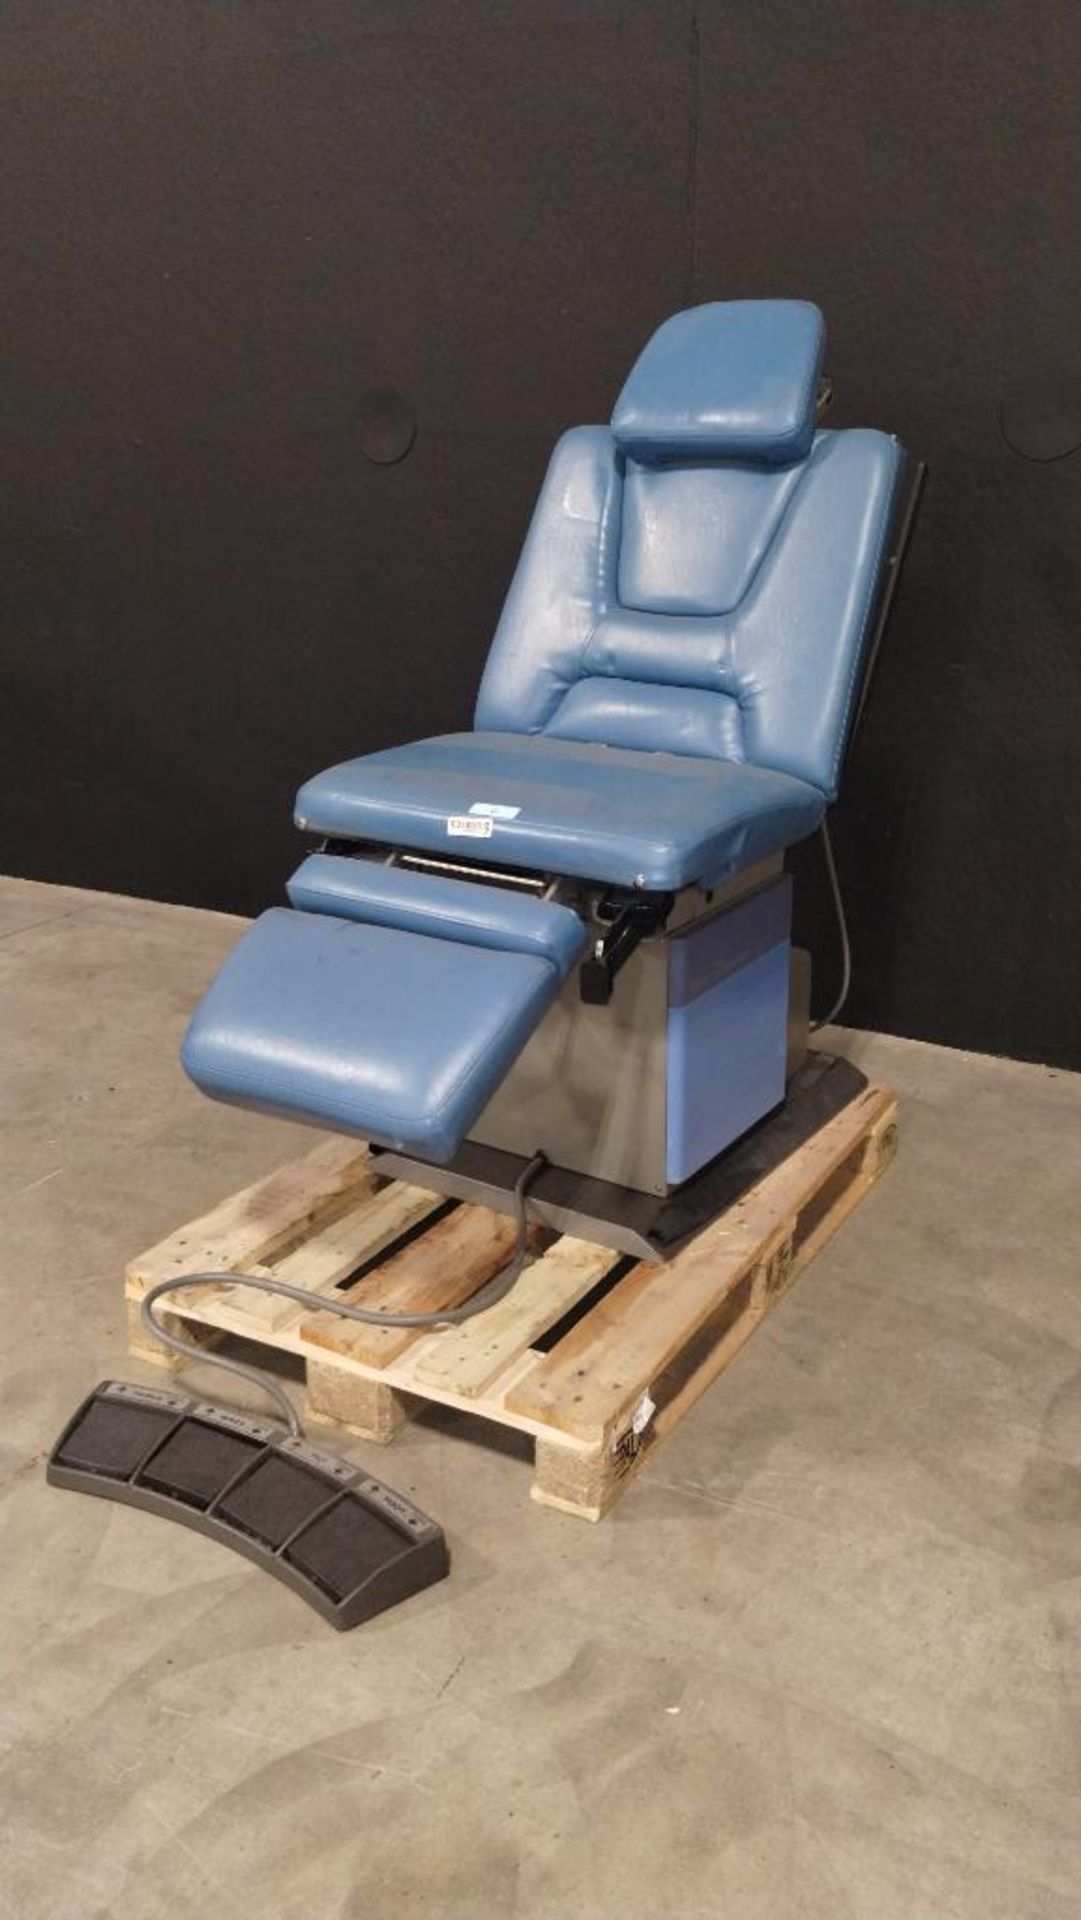 RITTER 75 SPECIAL EDITION POWER EXAM CHAIR WITH FOOTSWITCH - Image 3 of 3